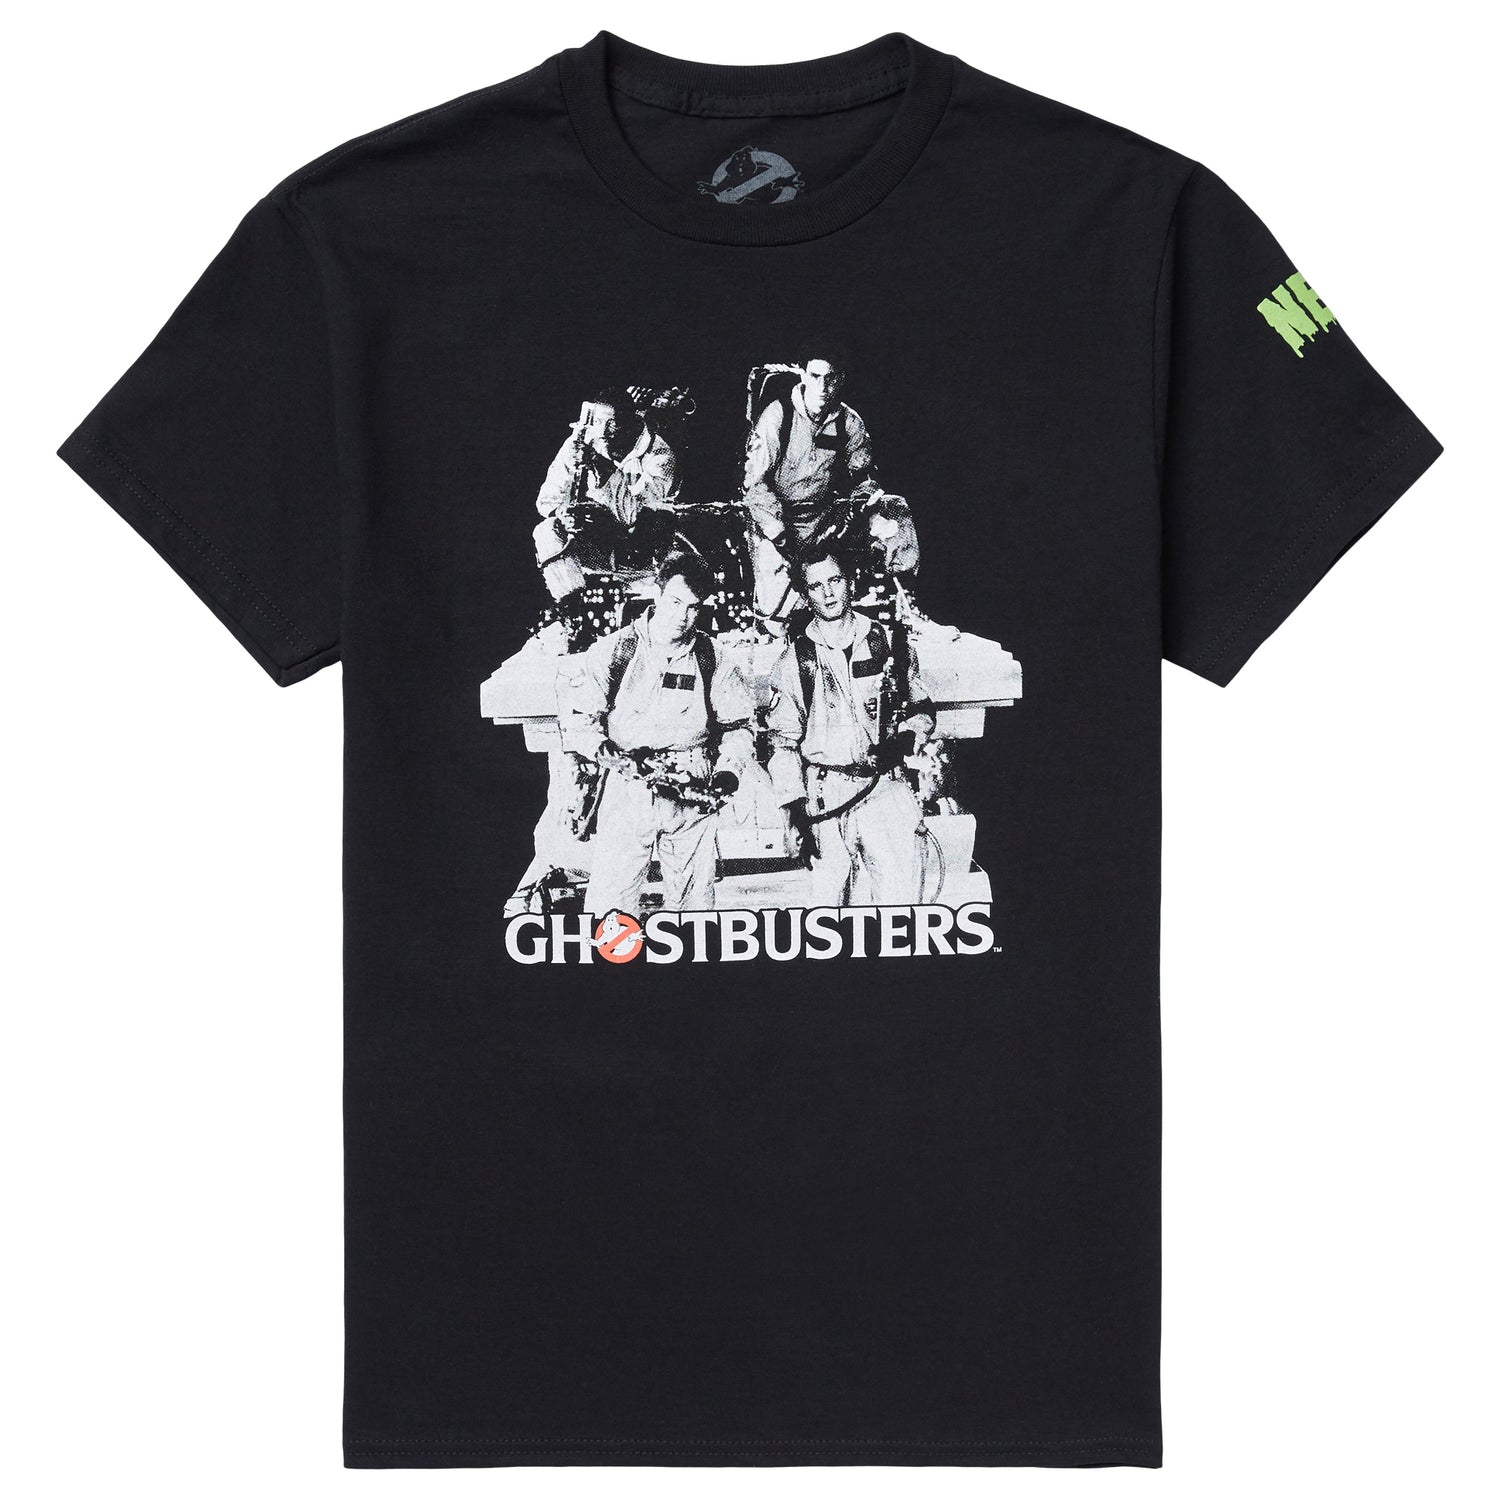 Neff Ghostbusters No Ghost Tee - White | White T-Shirt in Size M